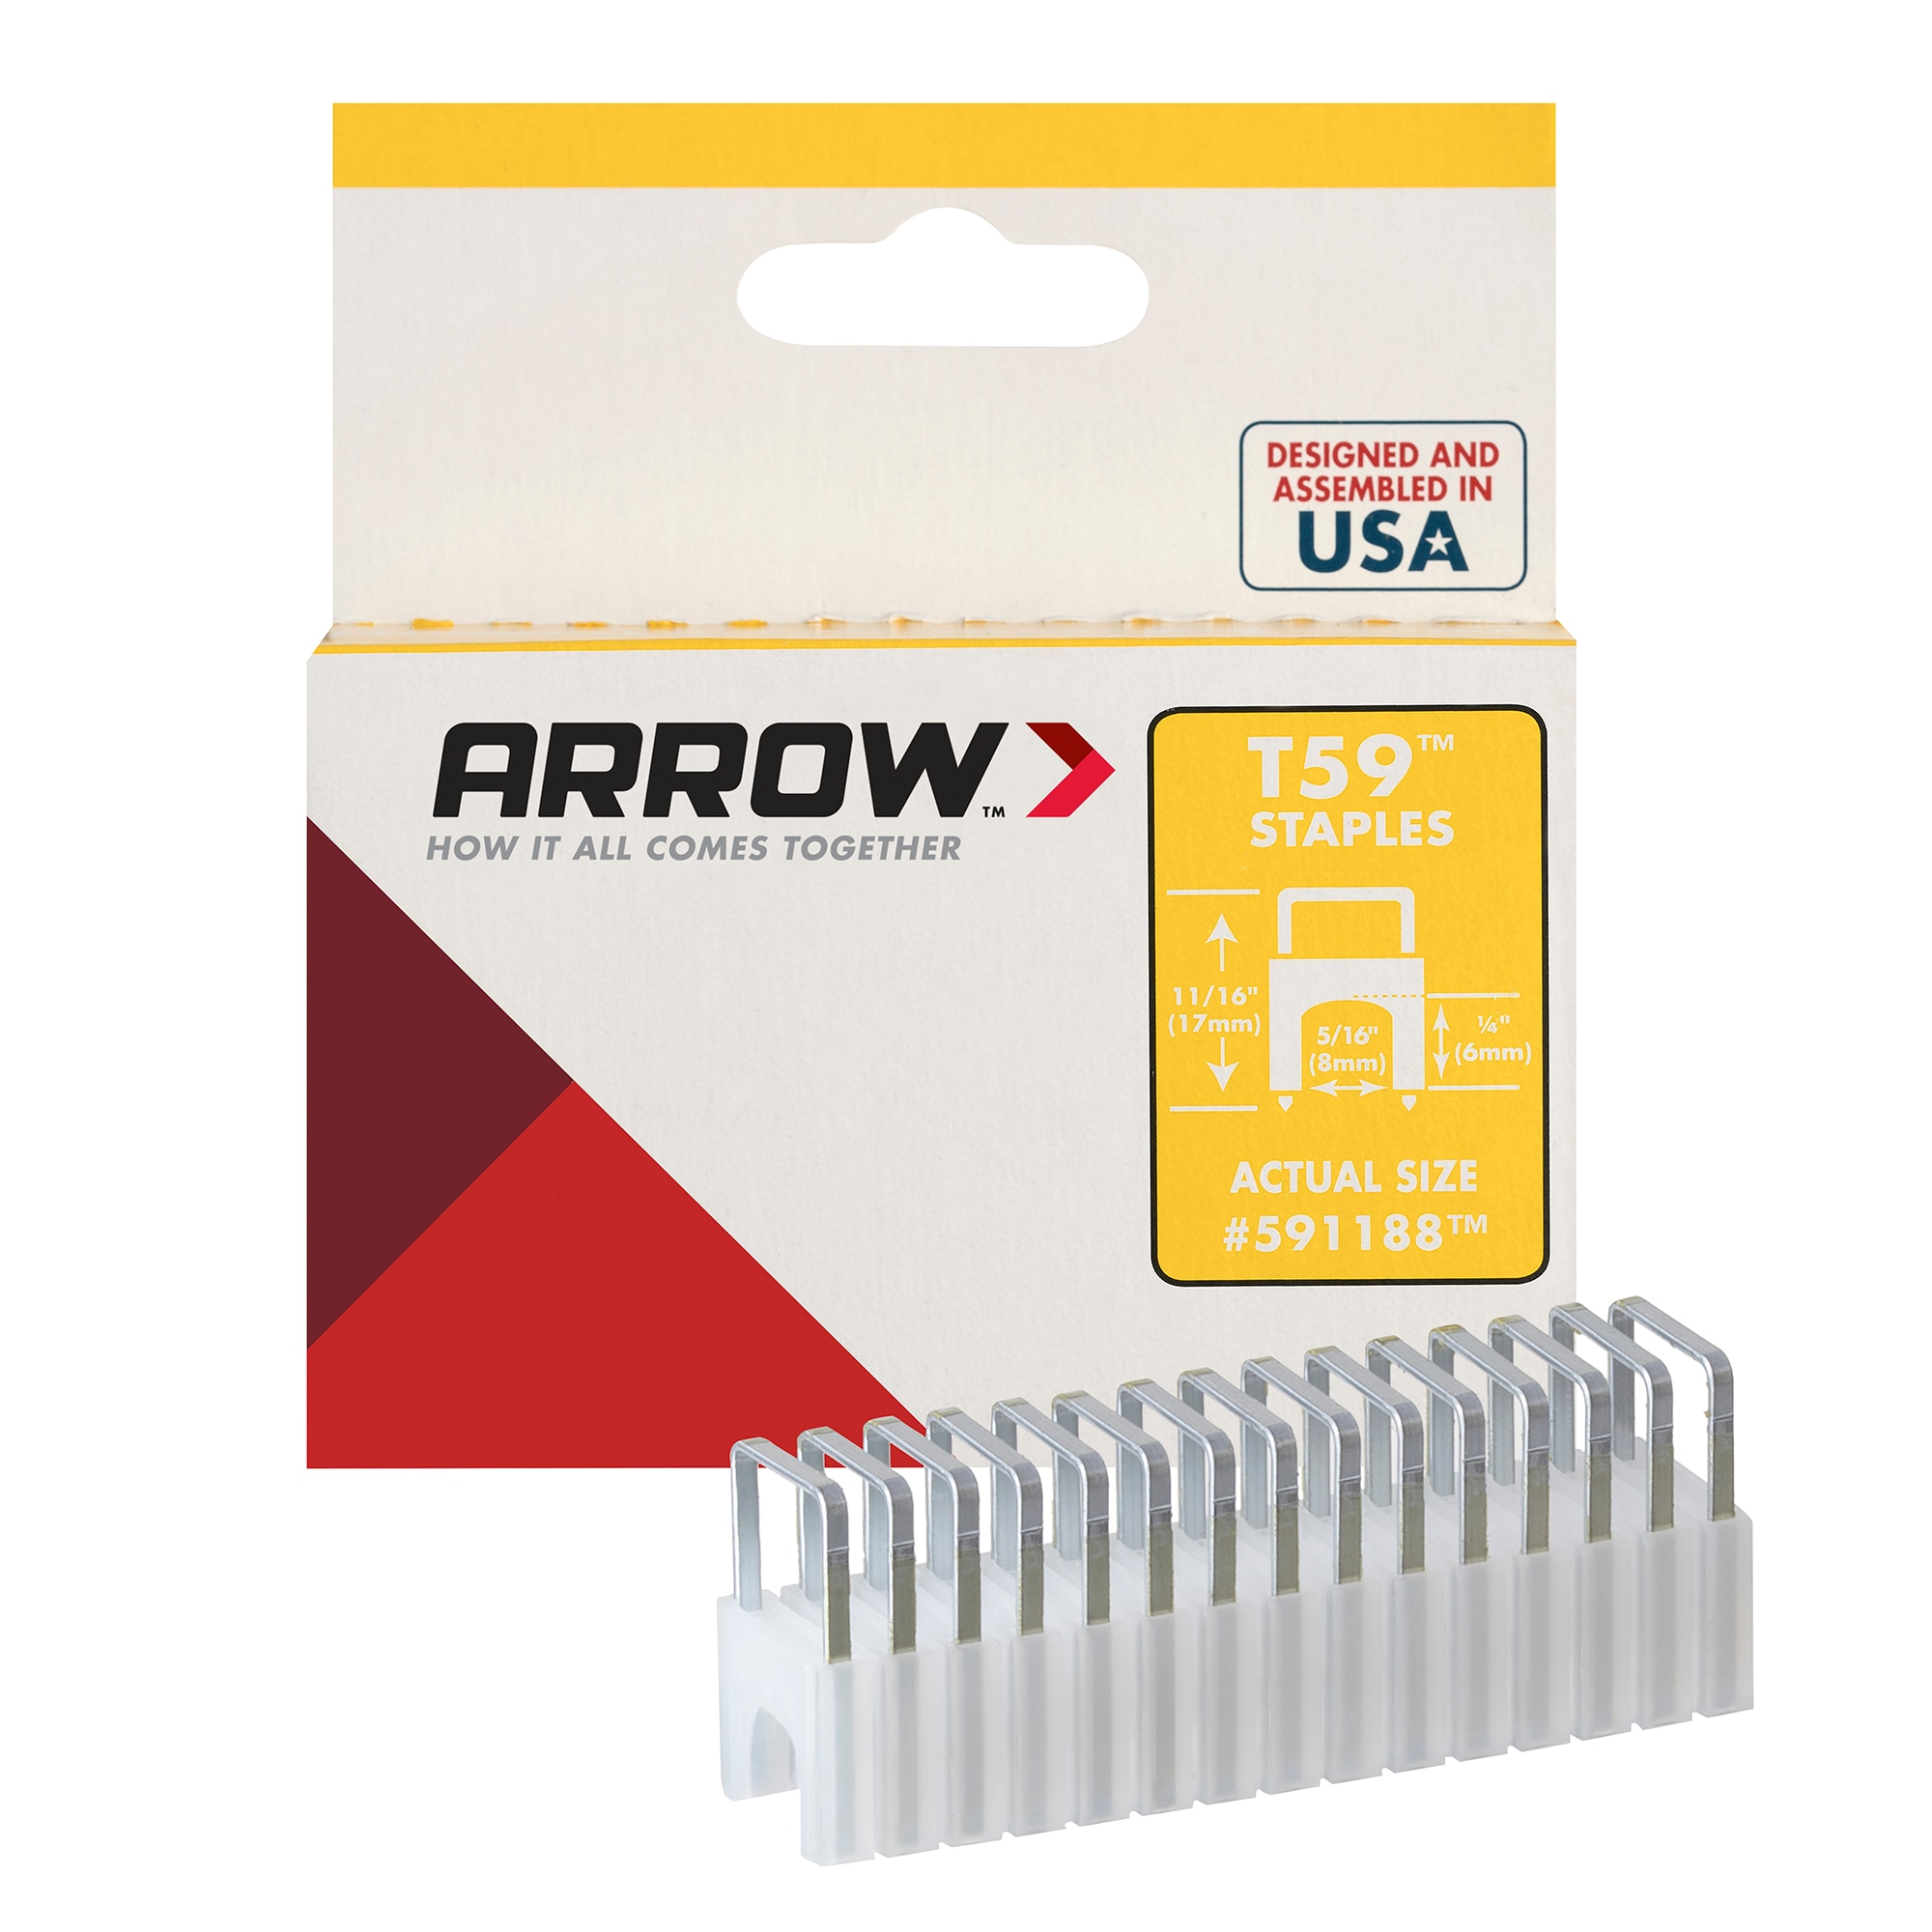 Arrow SL24D Staple Puller - 7.5-in Length - 1-in Staple Crown Size - For  Flooring and Upholstery Staples - Steel Construction